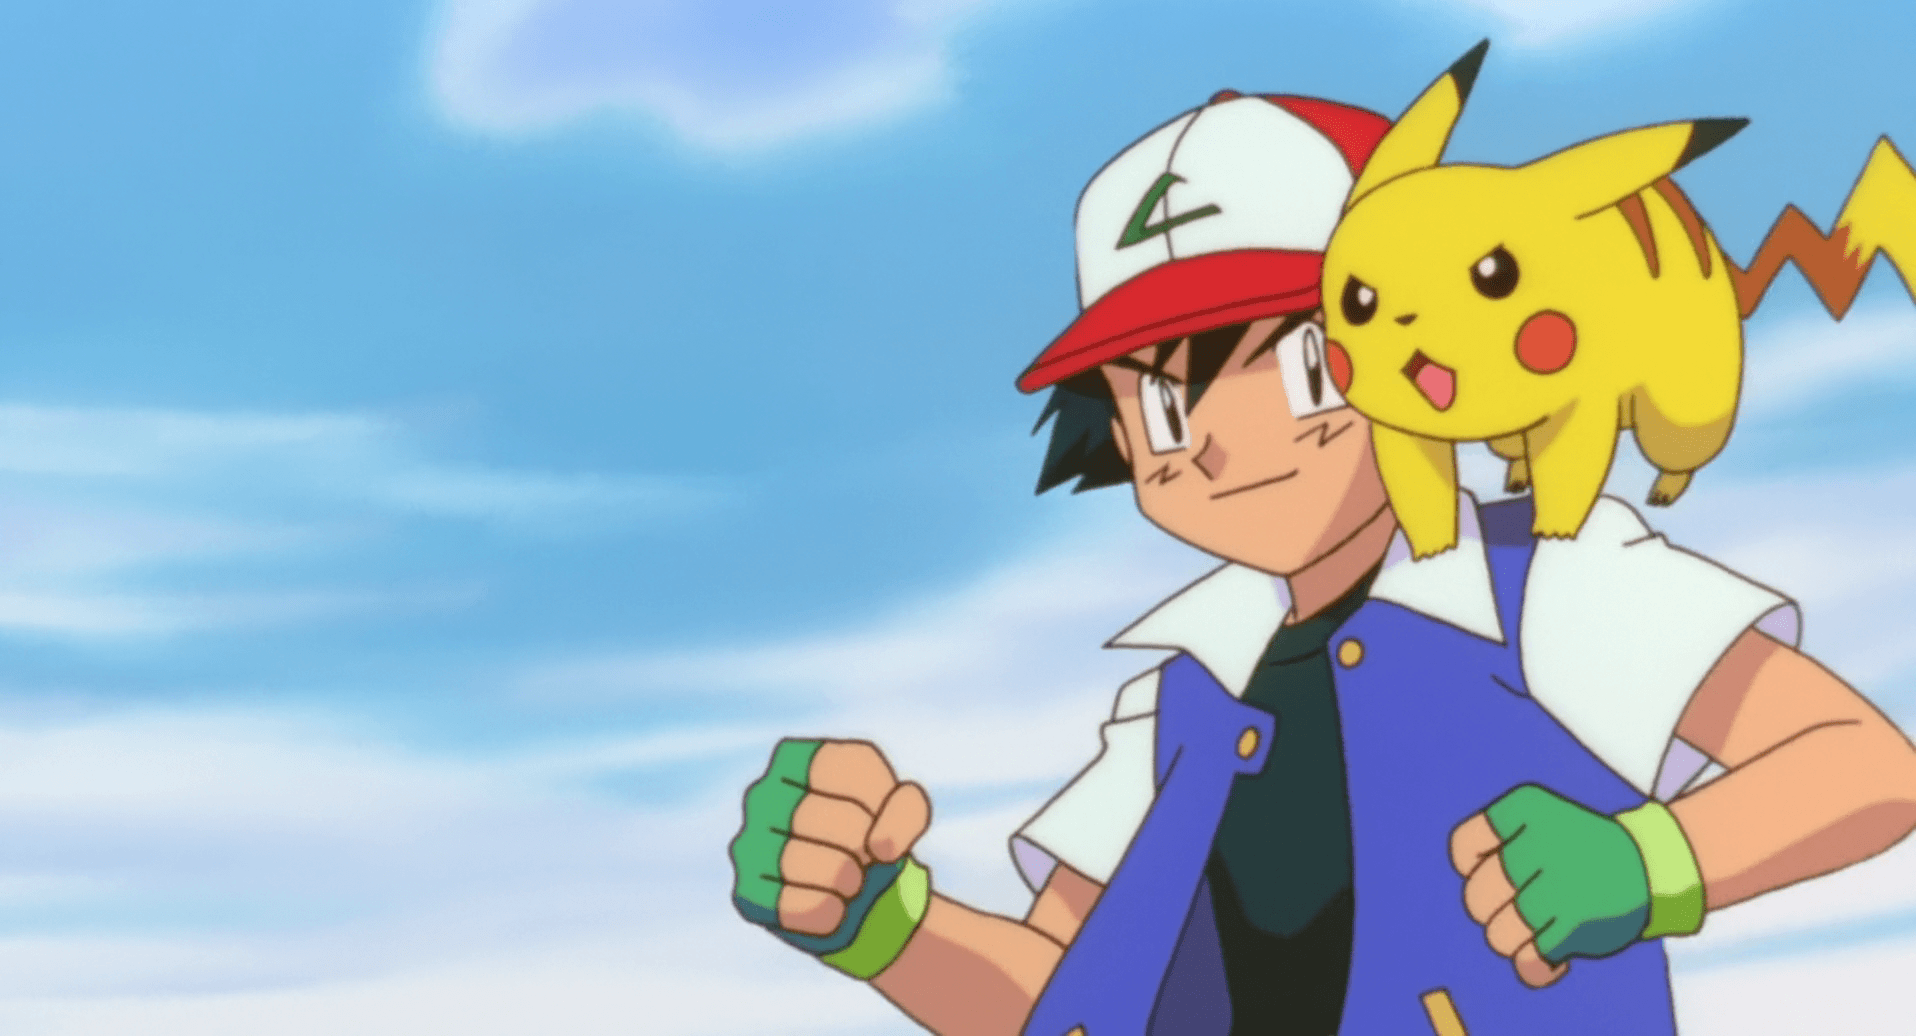 Pokémon: The First Movie Wallpaper and Background Imagex1036